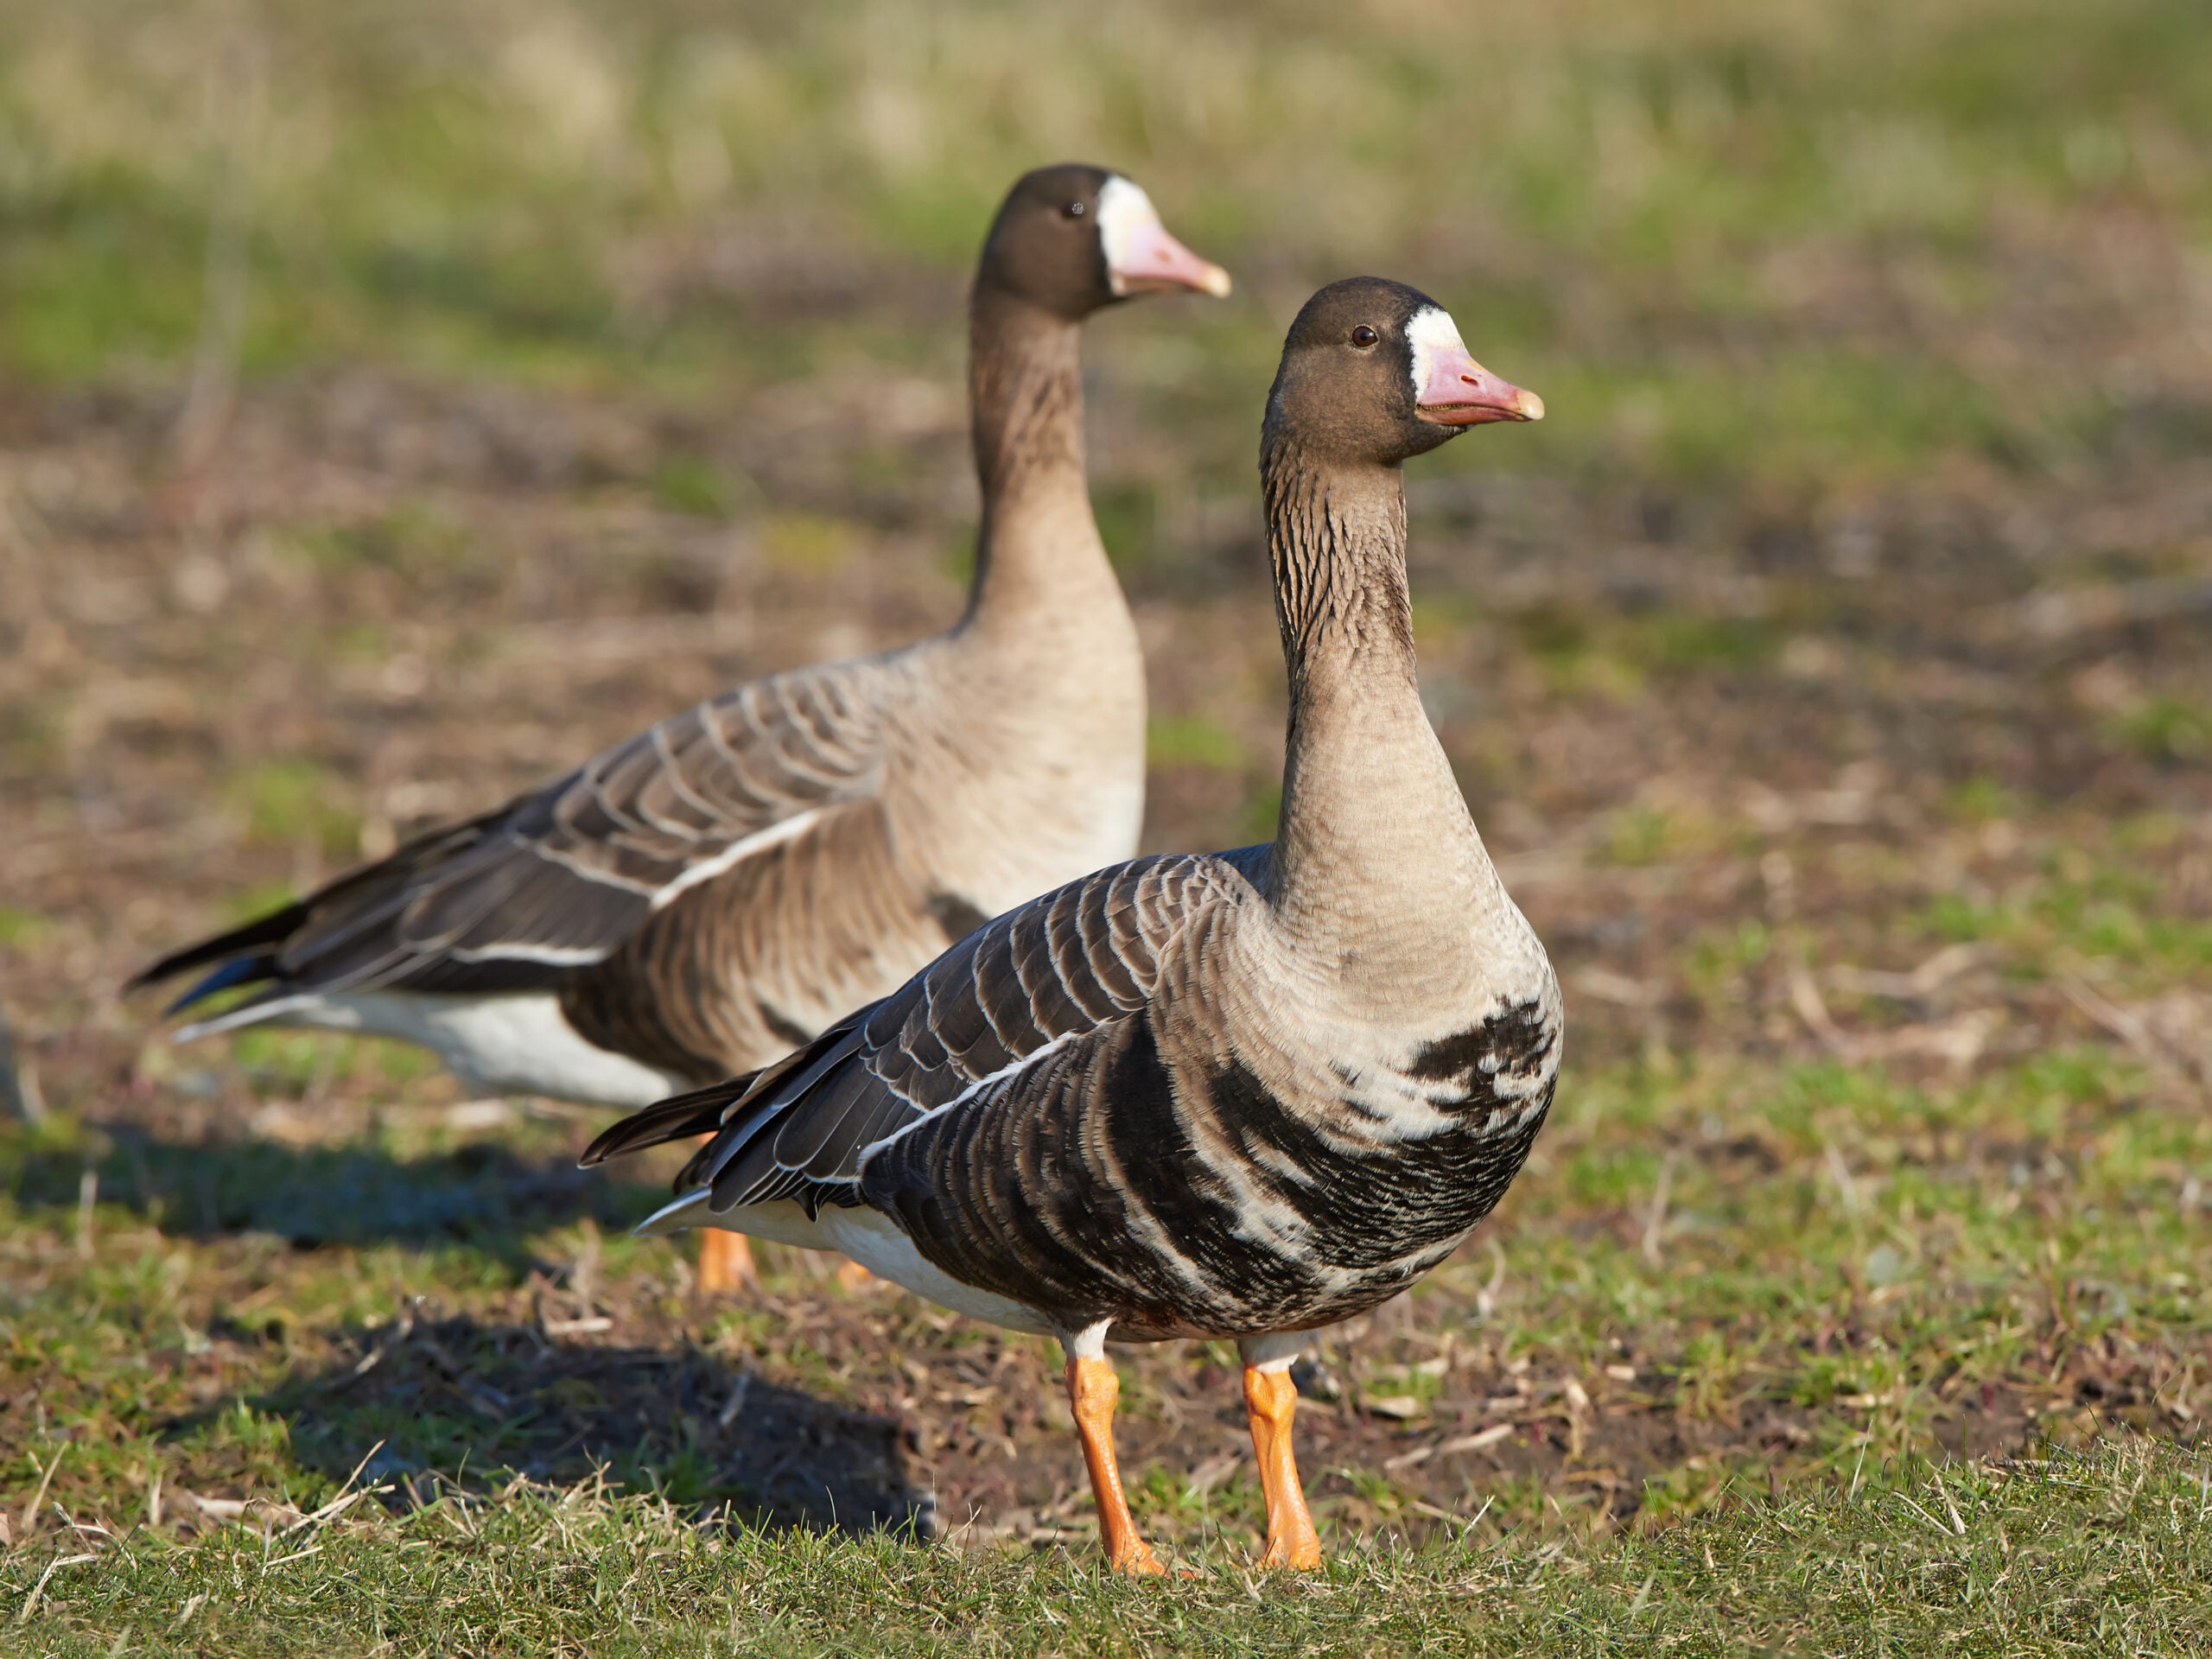 specklebelly geese